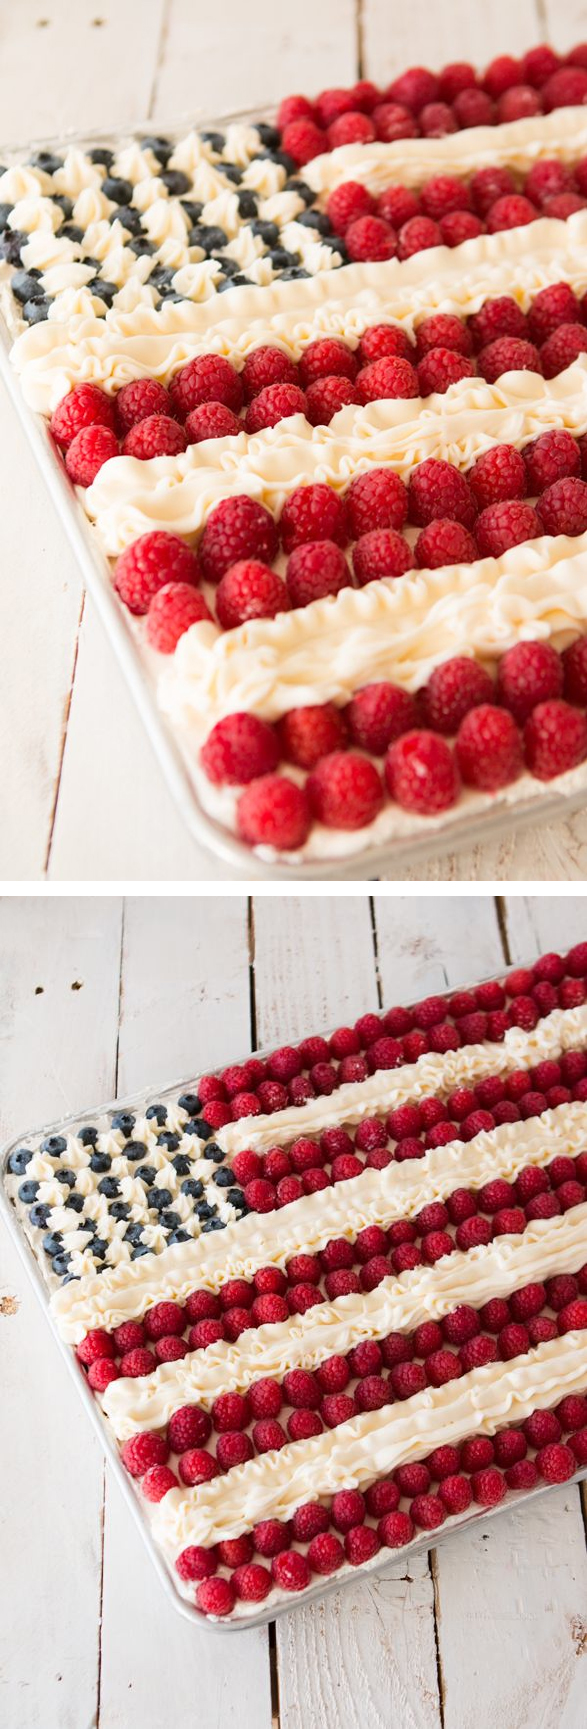 4th July Flag Cake - Easy white cake, berries and two kinds of delicious frostings for the best flag cake around.